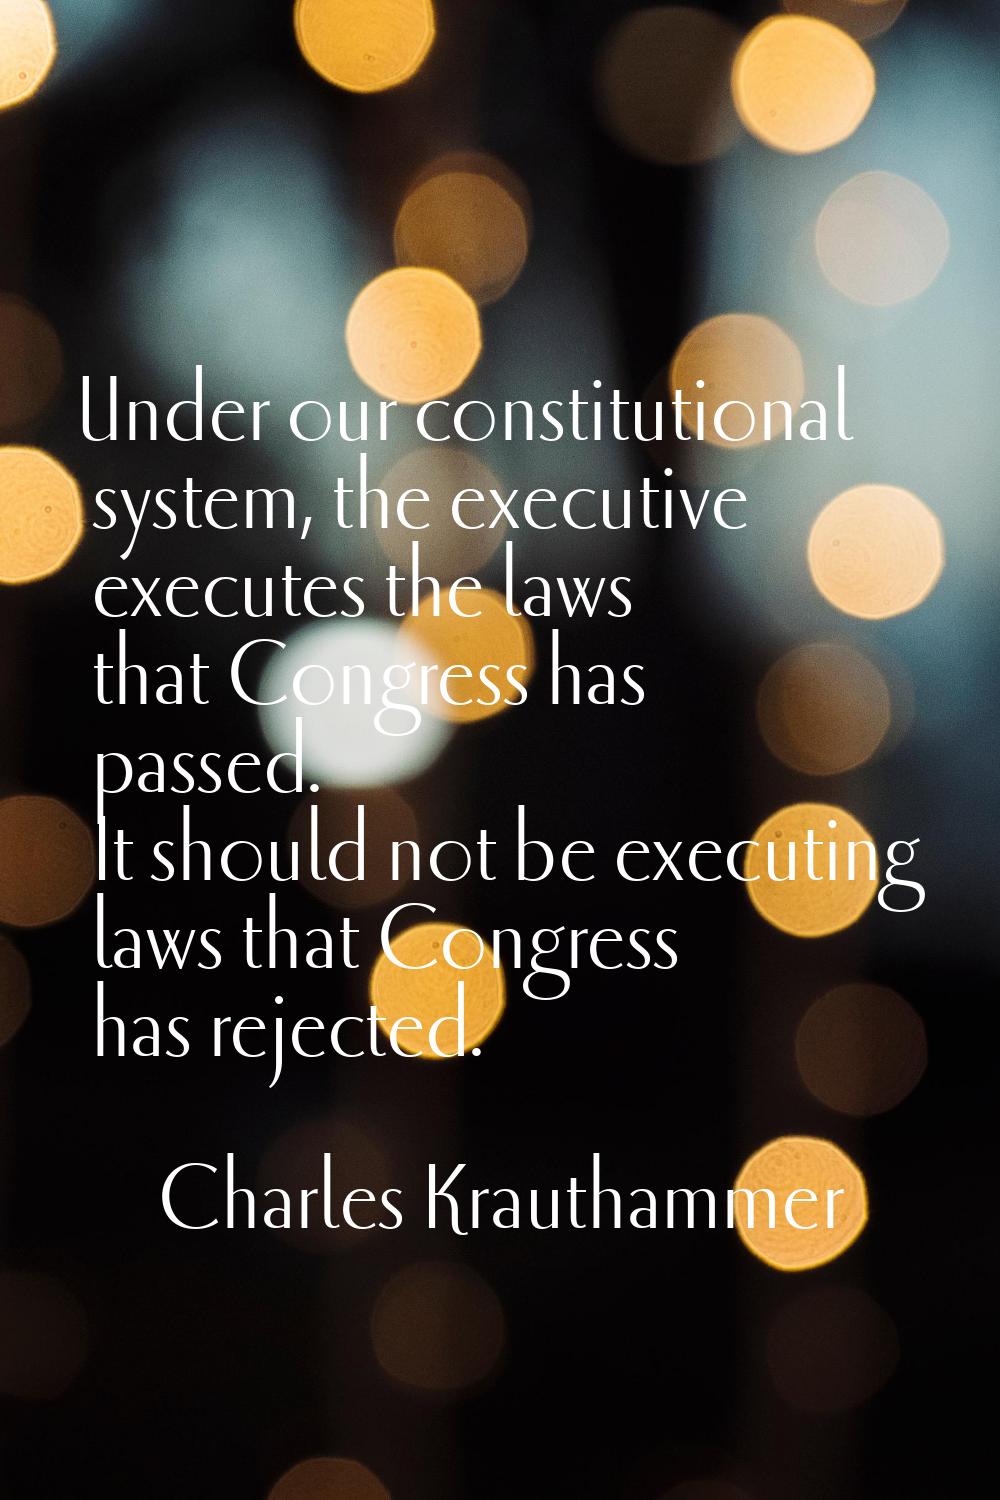 Under our constitutional system, the executive executes the laws that Congress has passed. It shoul